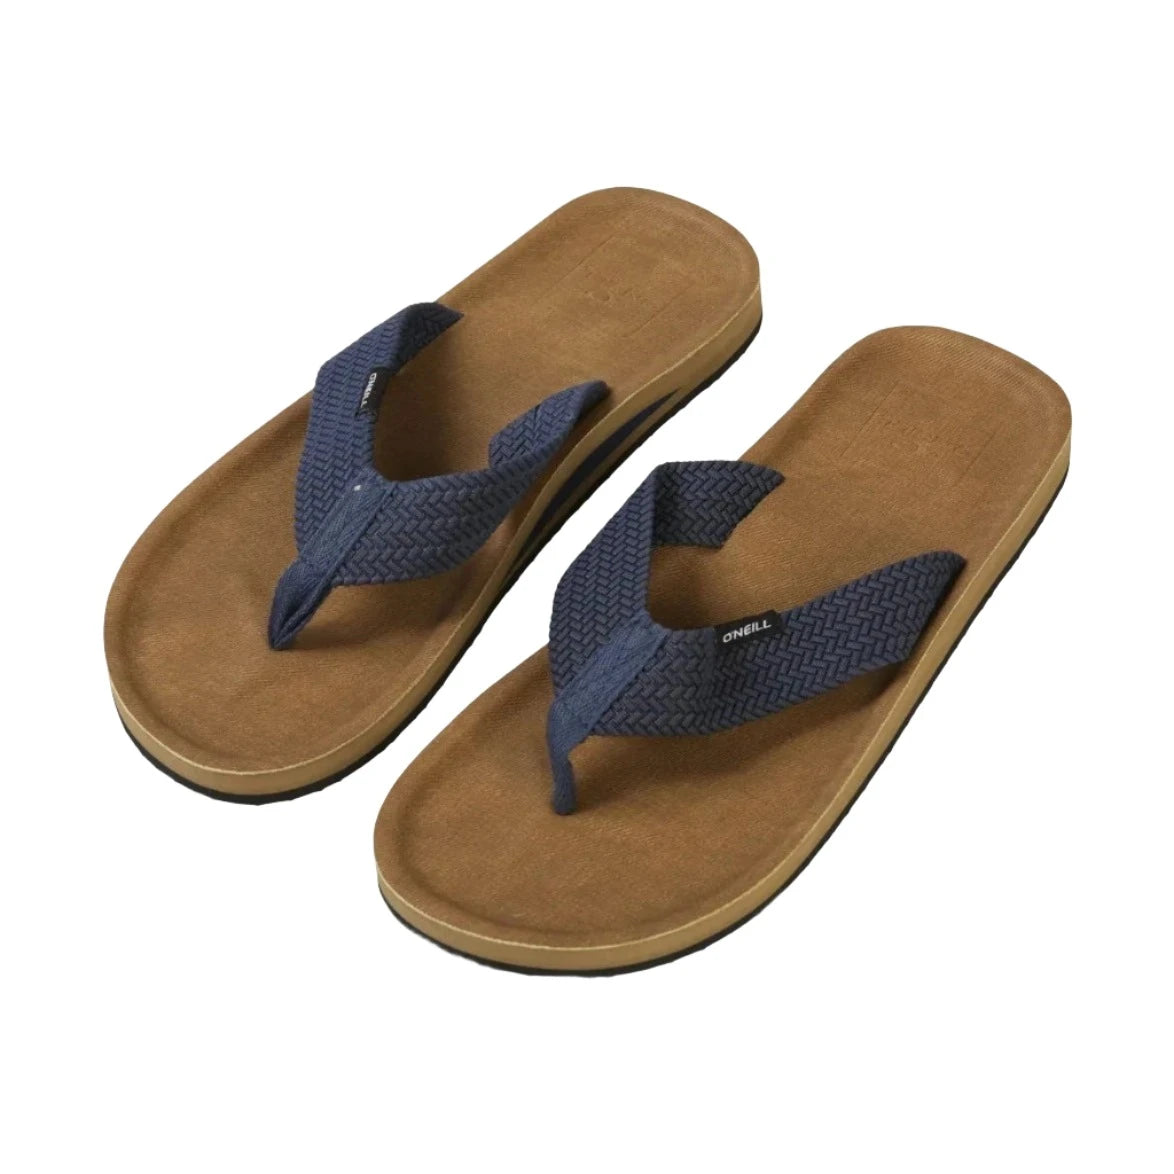 O'Neill Chad Sandals in Toasted Coconute